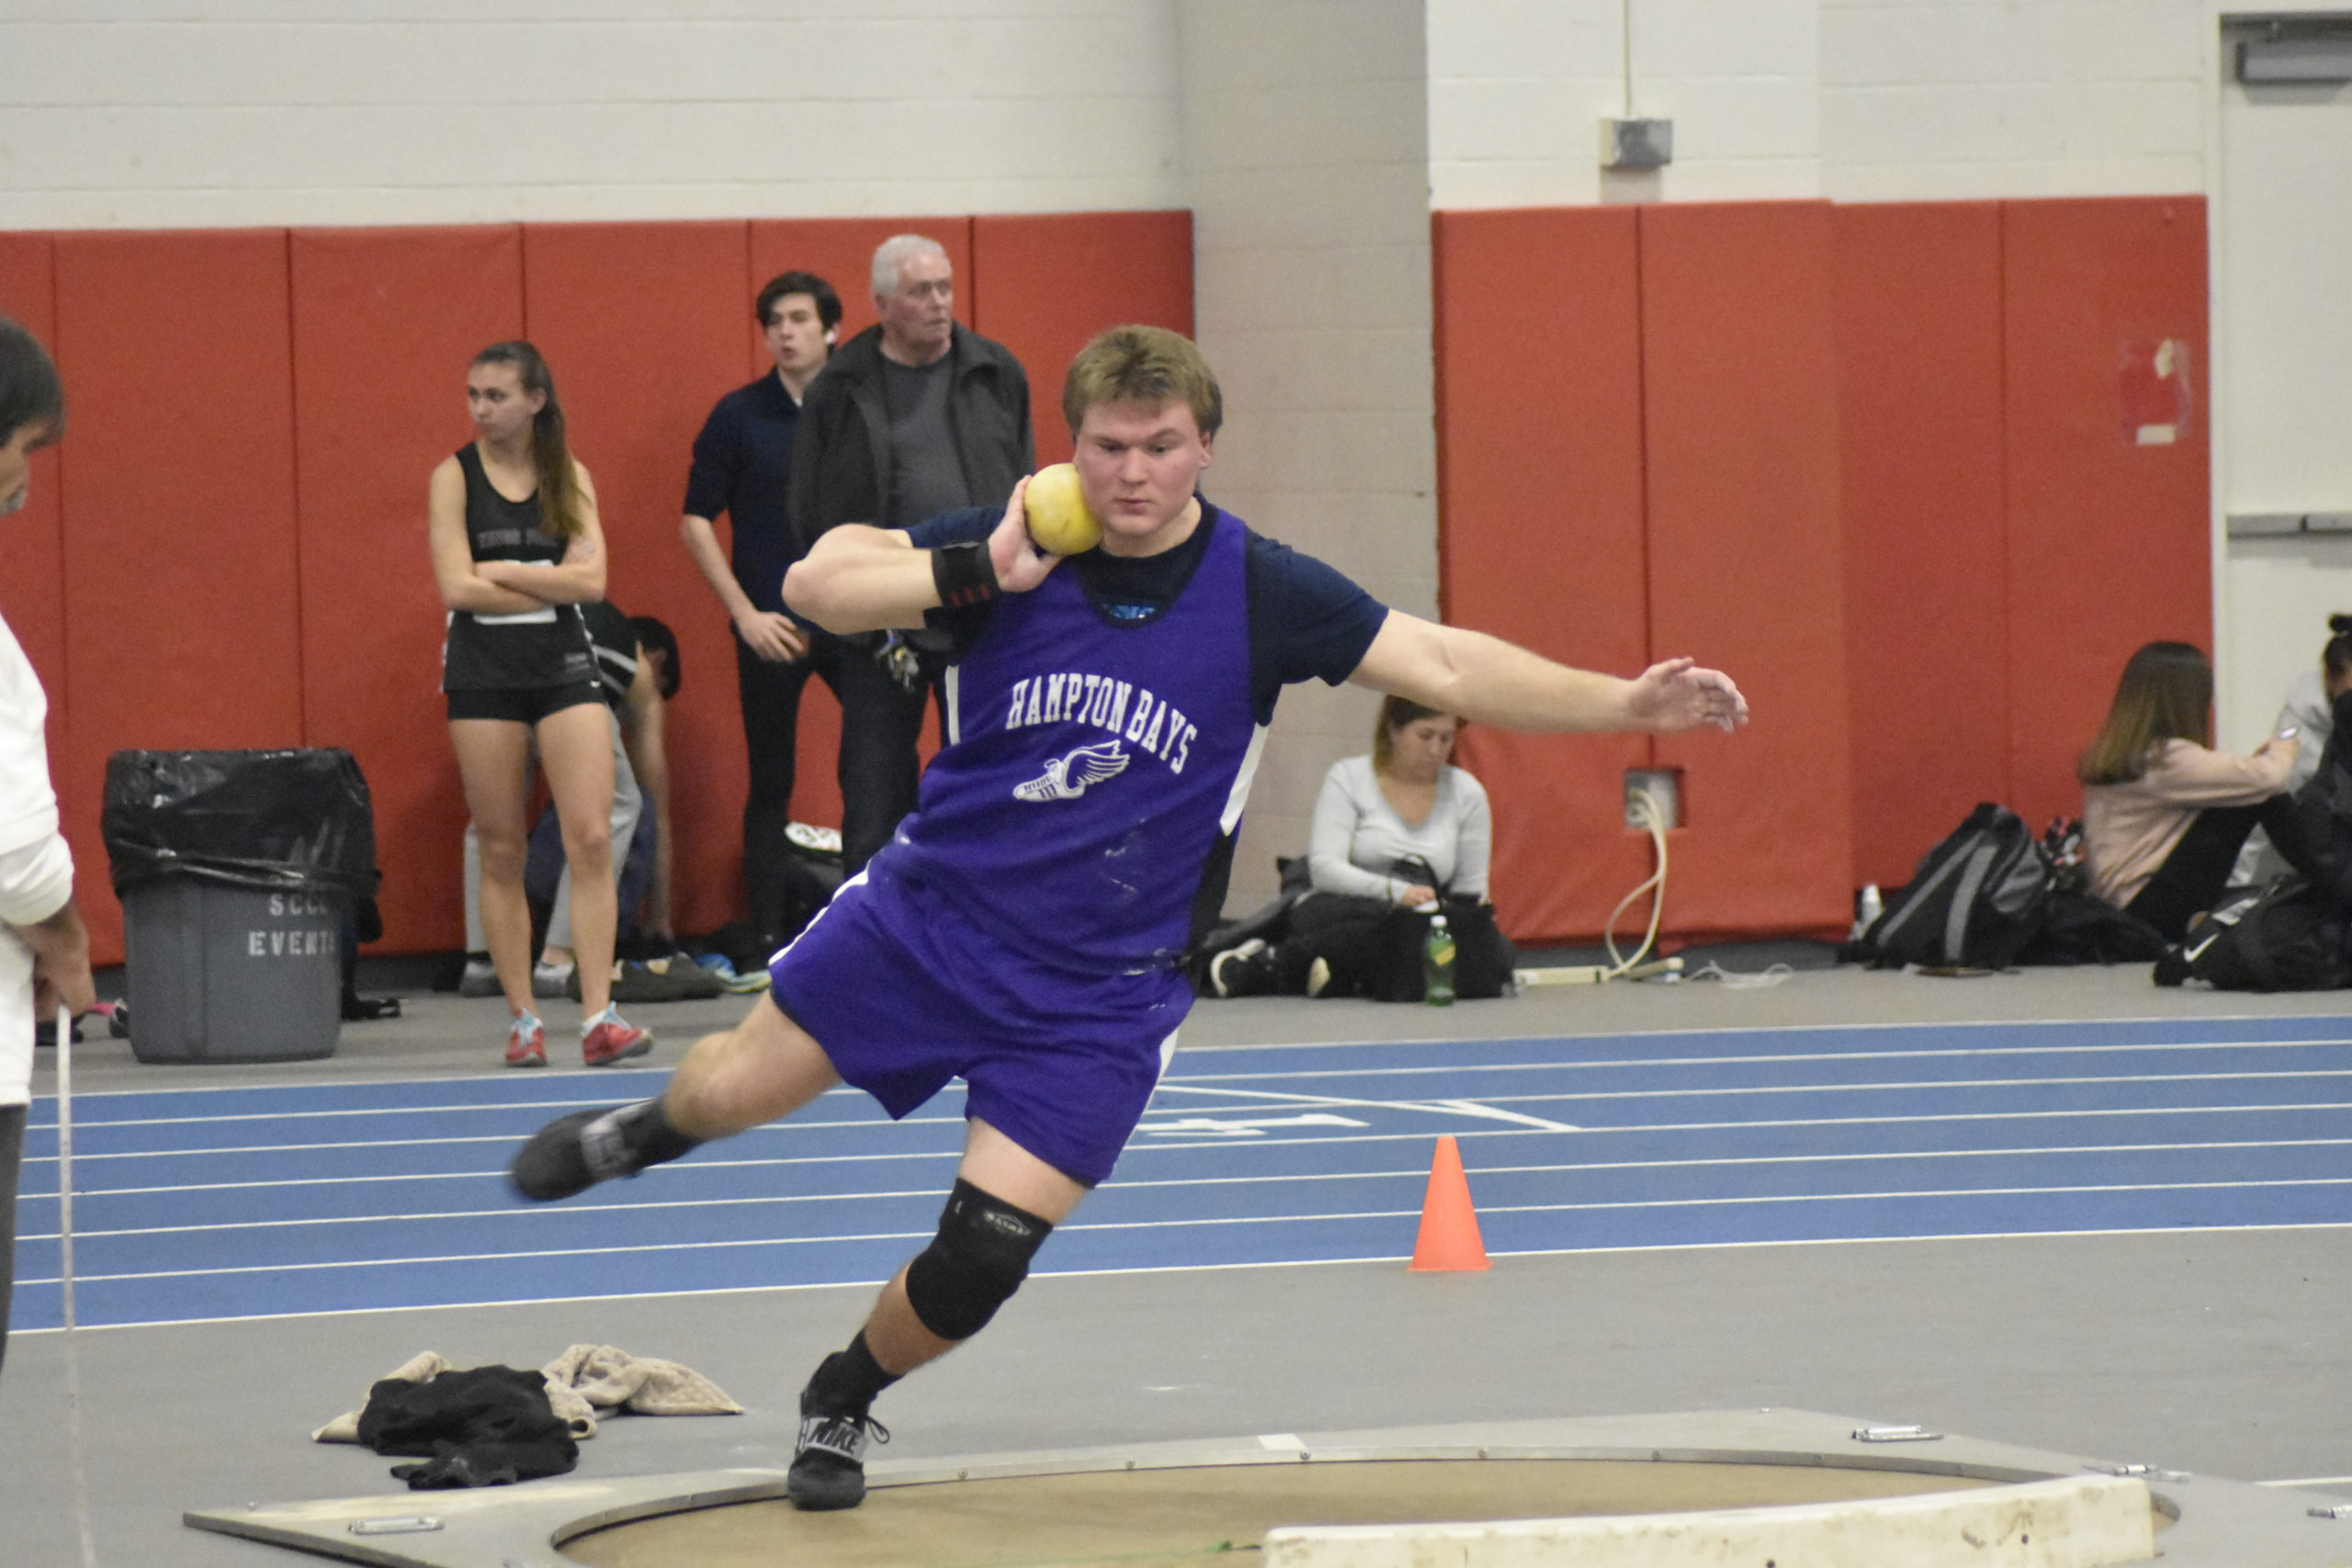 Hampton Bays senior Quinn Smith placed second in the county in the shot put and will be heading to the state meet next month